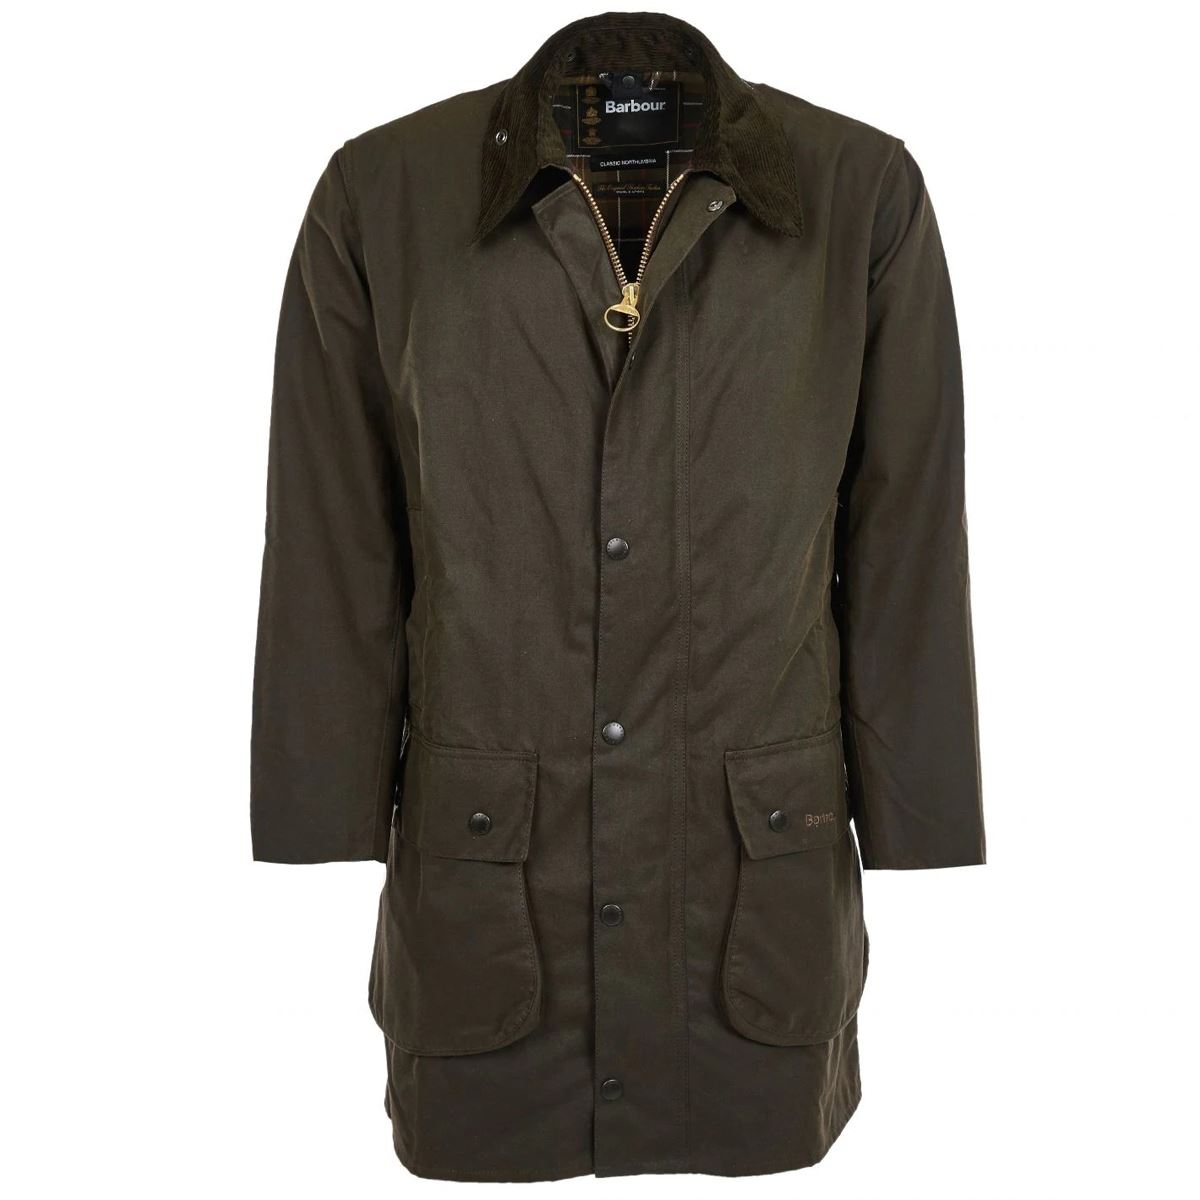 What sizes & colors does the Barbour Northumbria Wax Jacket come in?